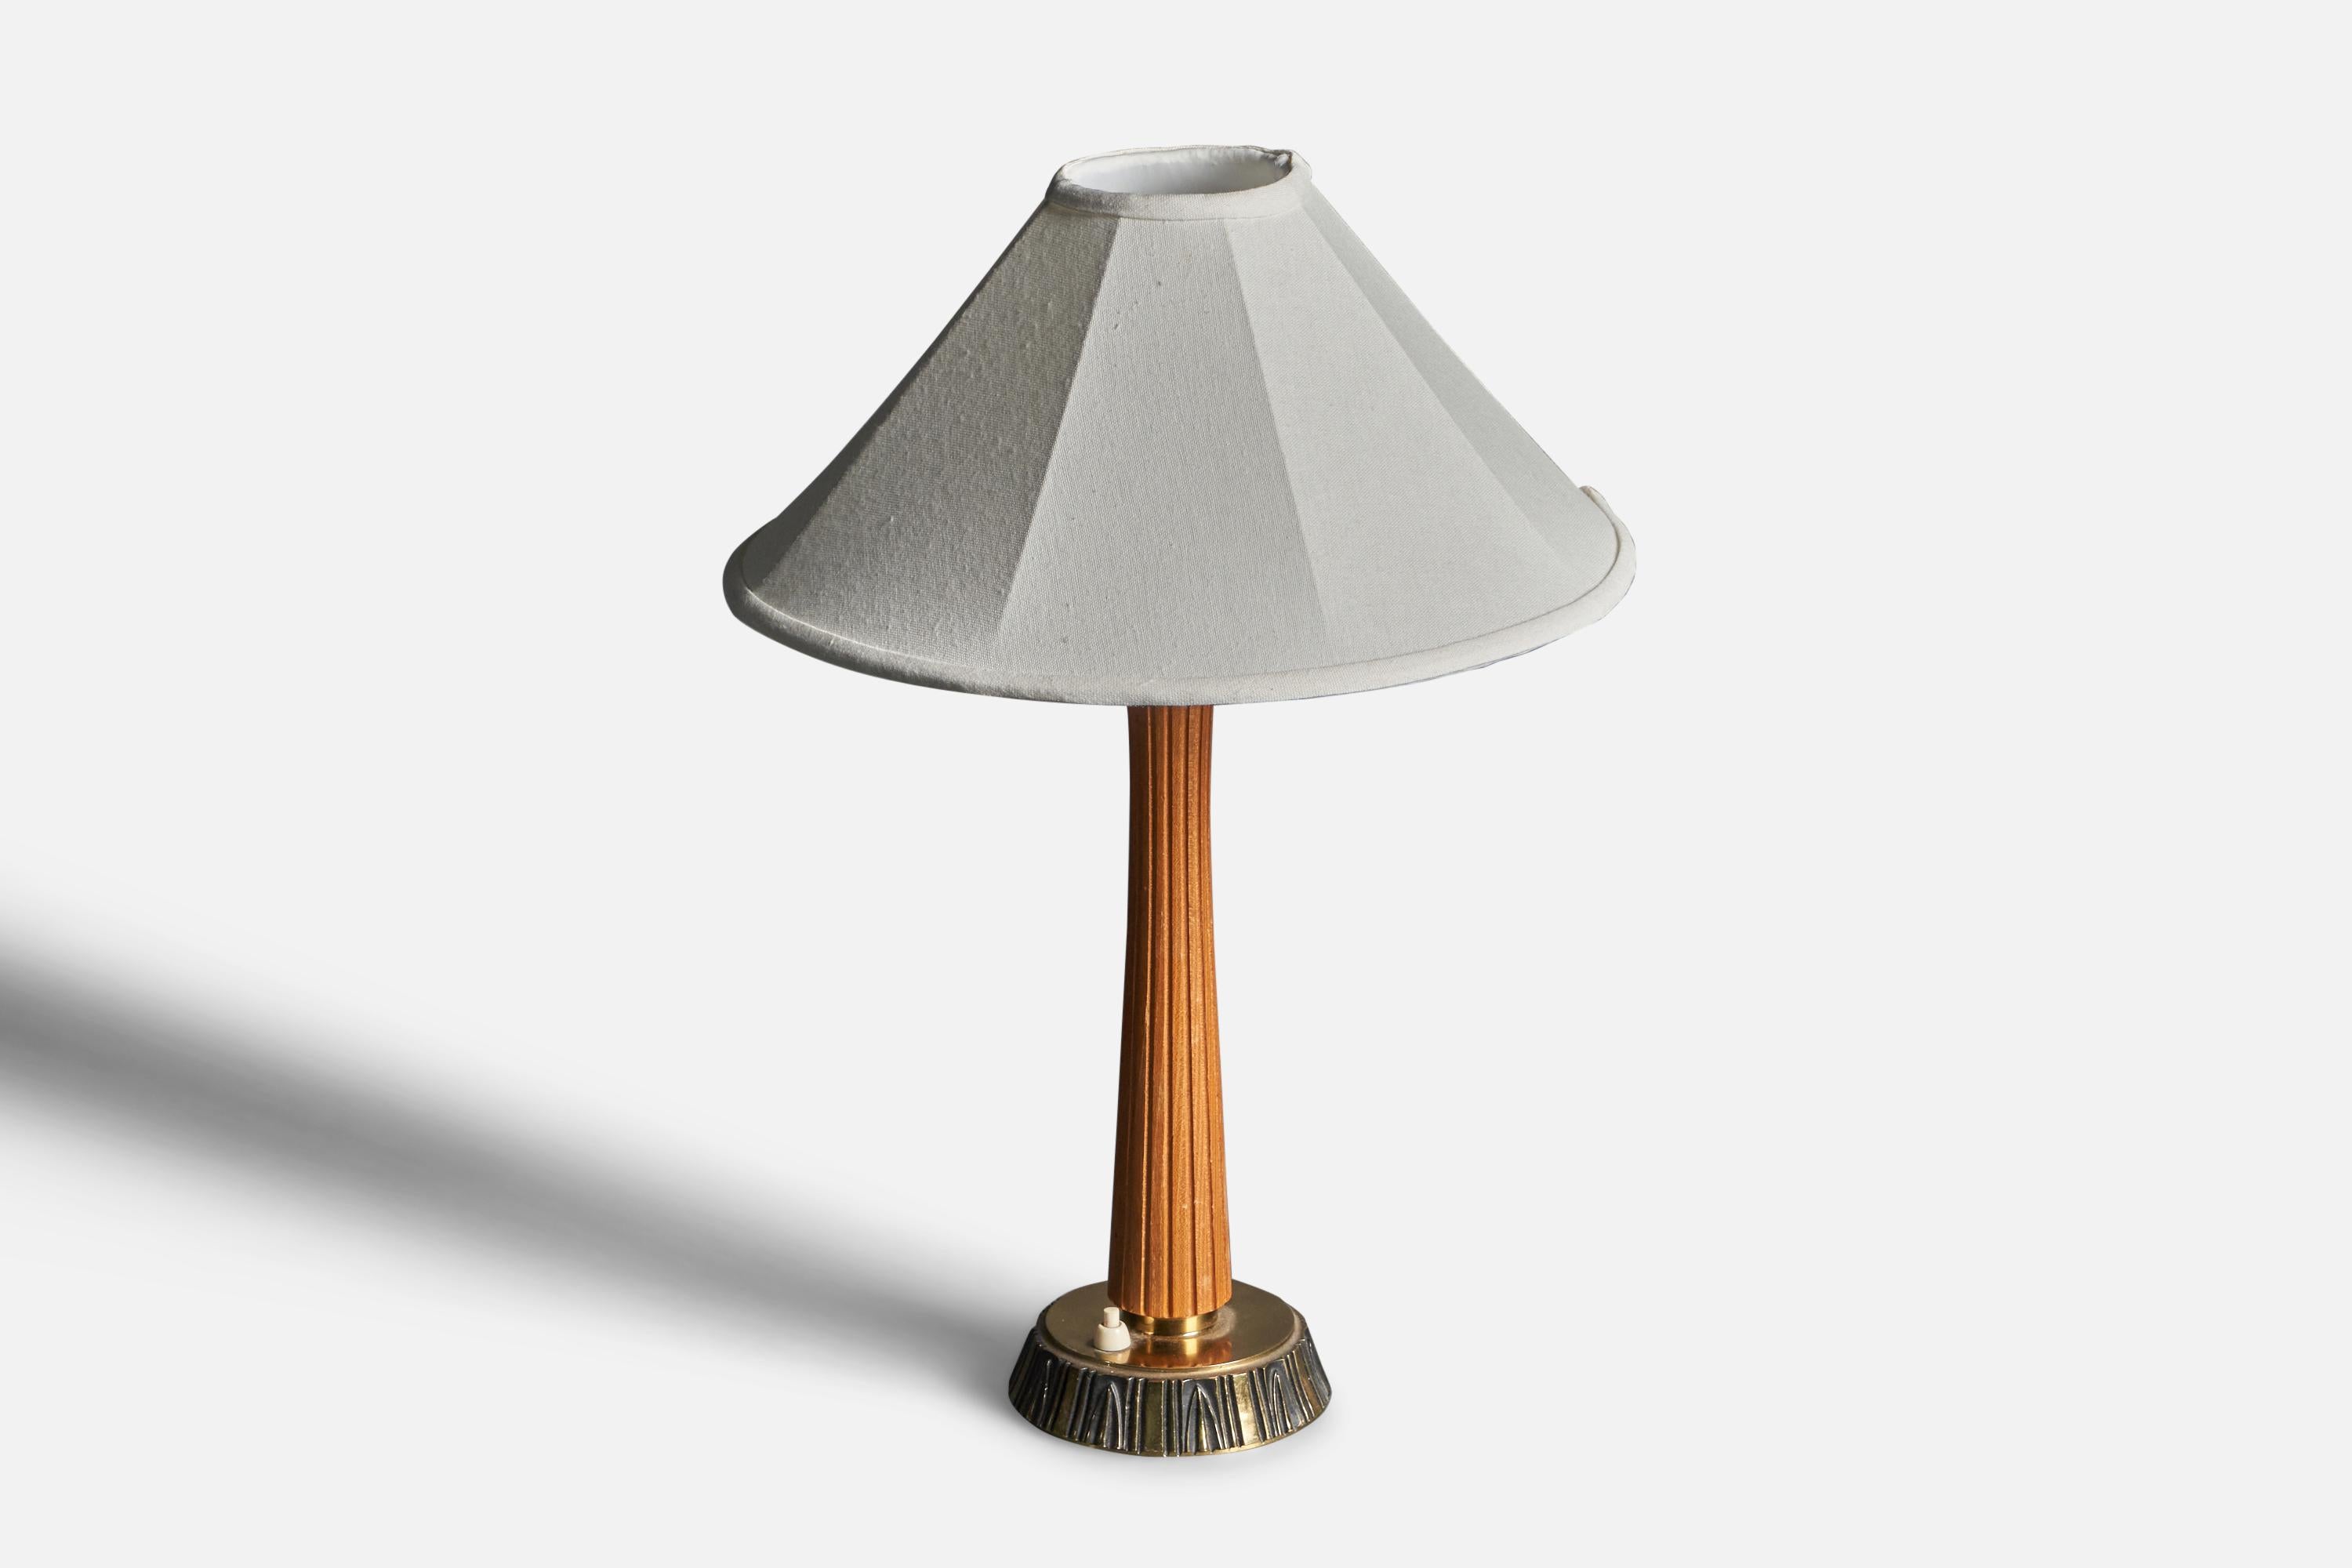 A table lamp / desk light. Designed by Swedish sculptor Sonja Katzin, (1919-2014). Produced by ASEA, Sweden, 1950s. Stamped.

Stated dimensions exclude lampshade. Height includes sockets. Sold without lampshade.